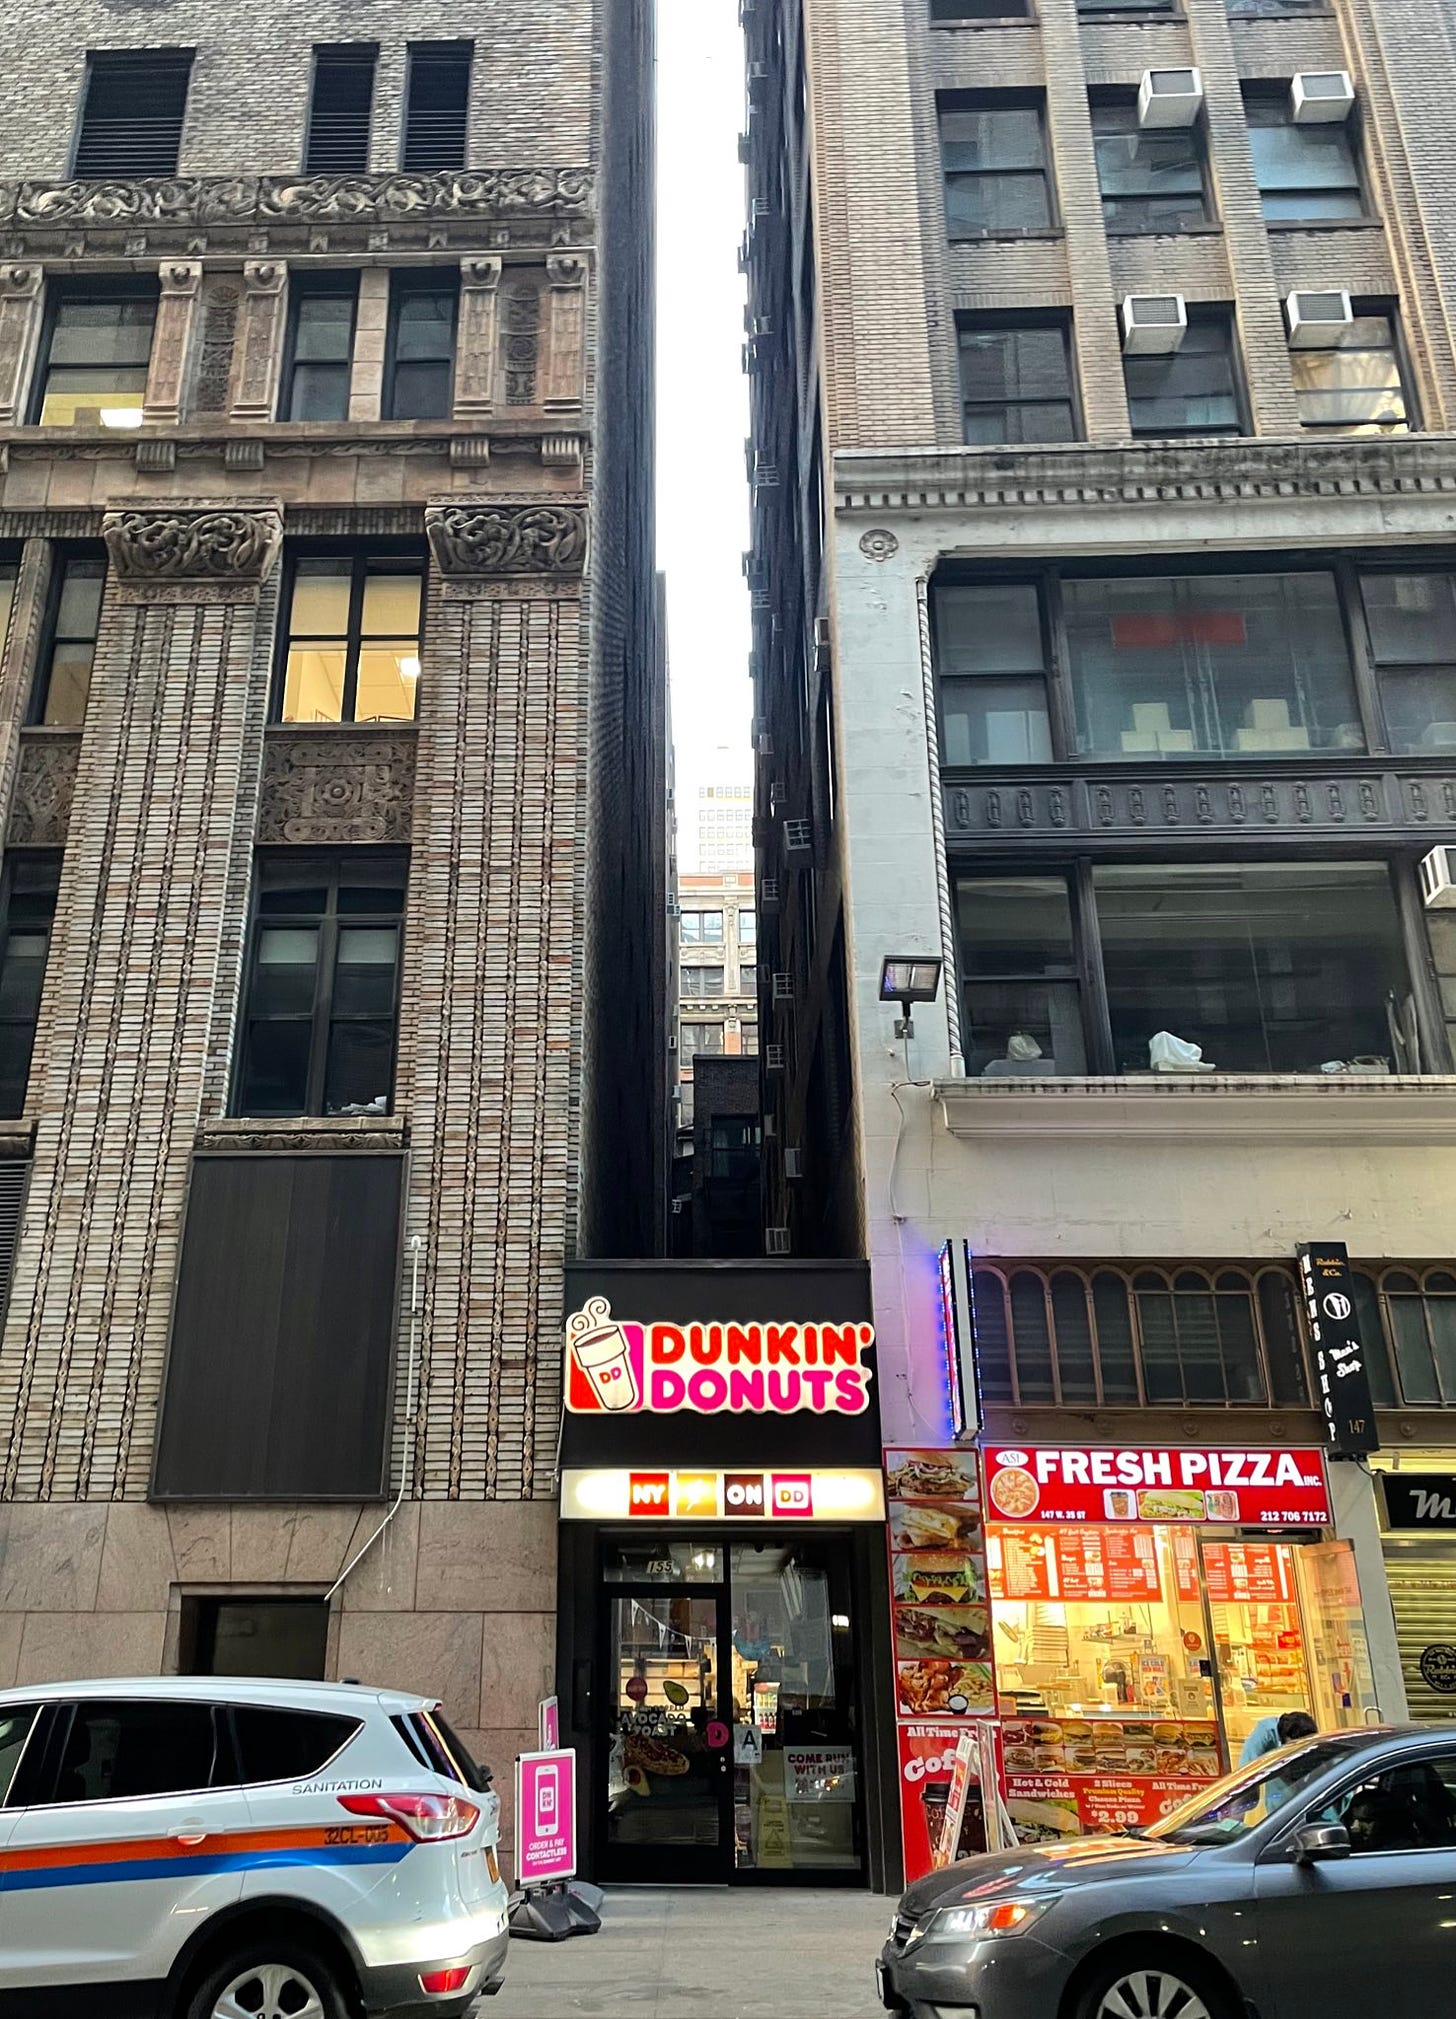 A dunkin donuts squeeze between two buildings